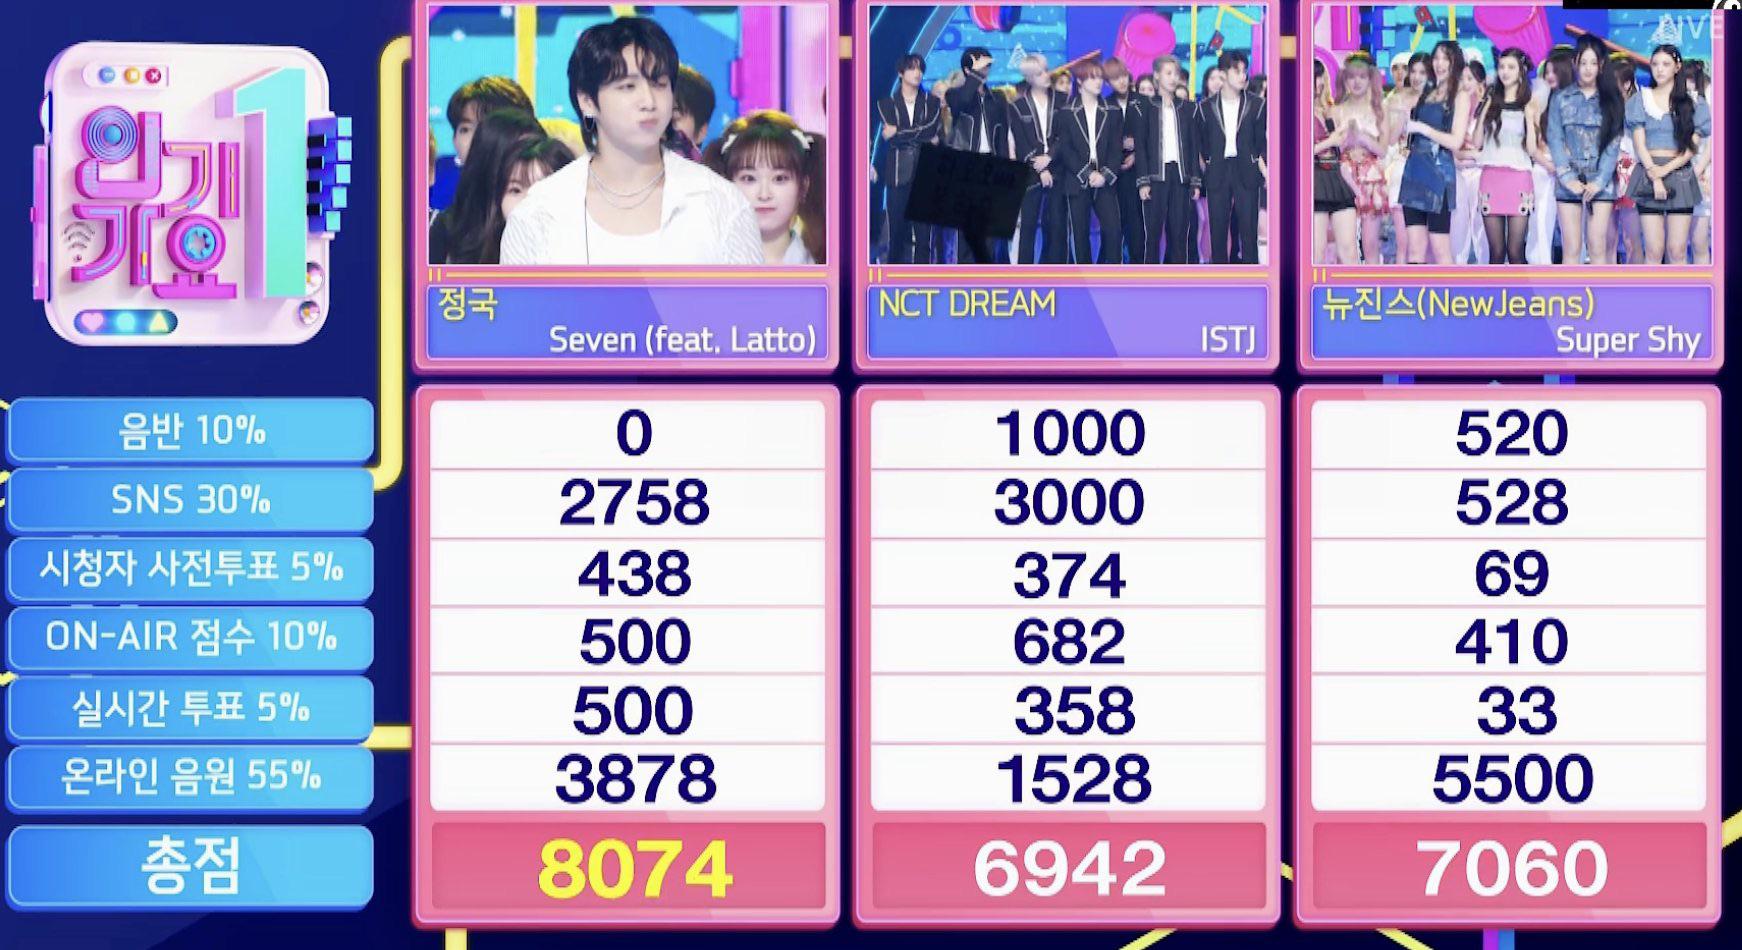 230730 Jungkook has taken his third win for “Seven (feat. Latto)” on this week’s Inkigayo